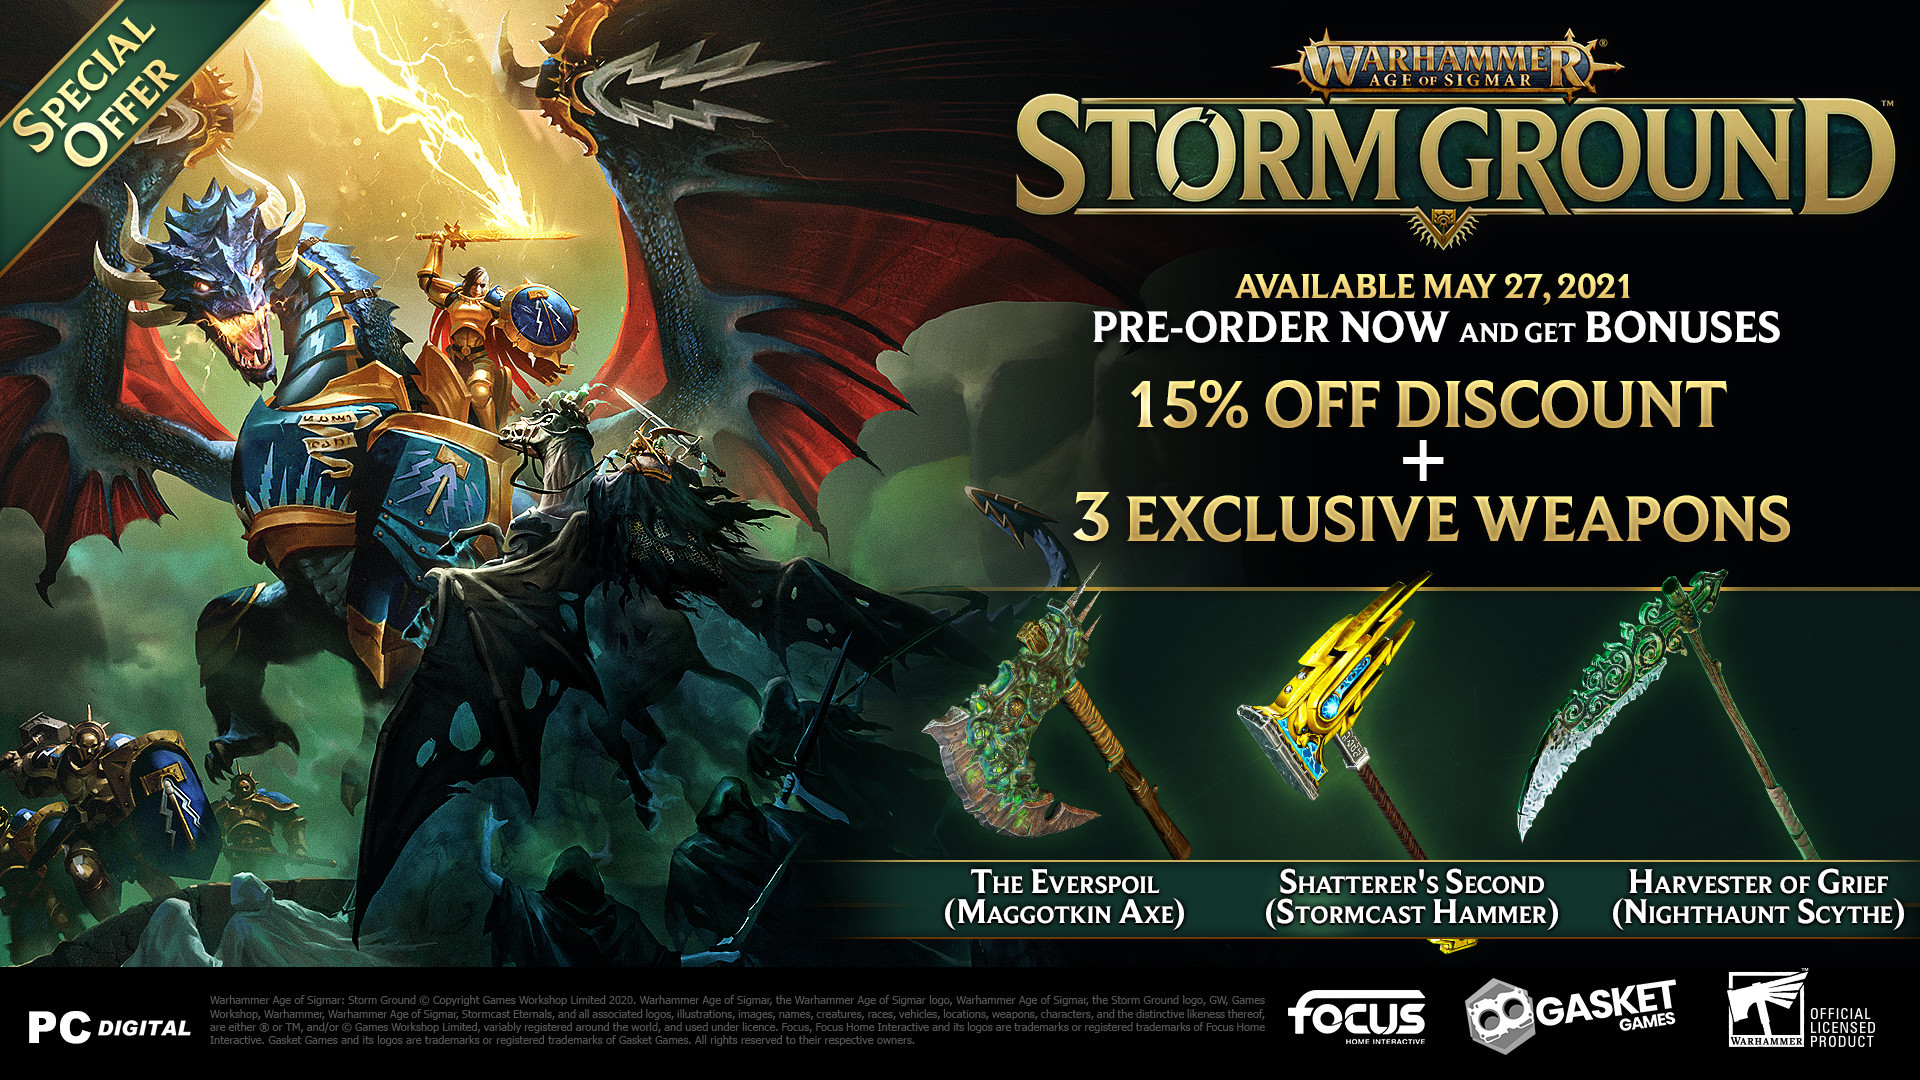 Warhammer Age of Sigmar: Storm Ground Launches